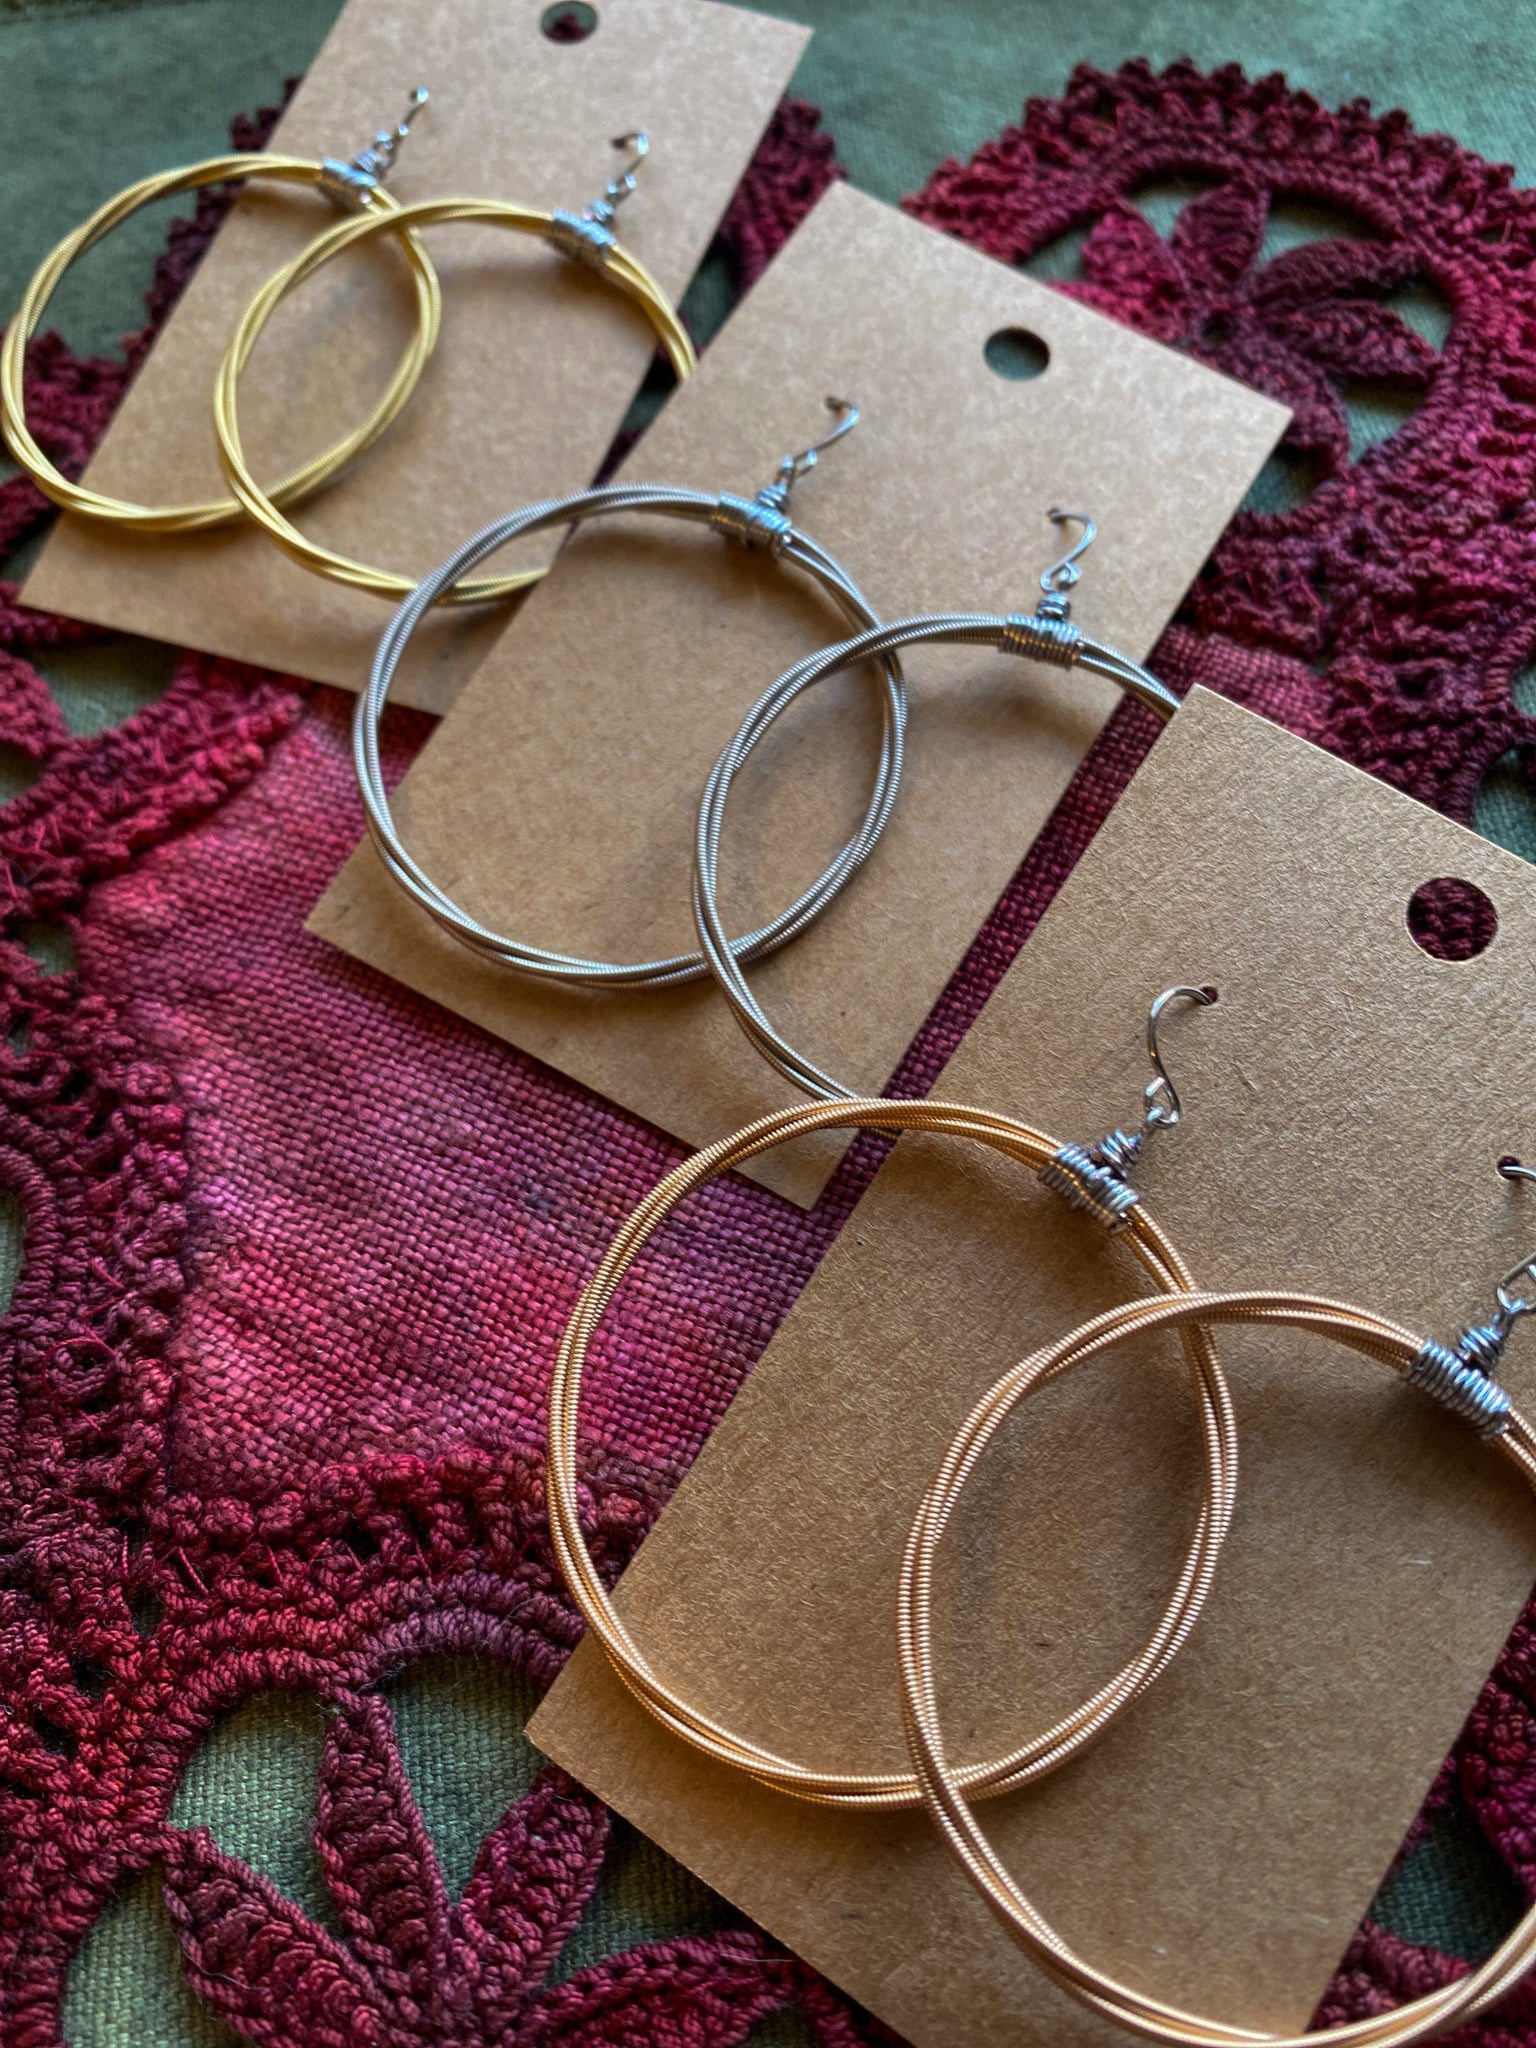 Guitar String Hoop Earrings - Set of 3 Pairs, Silver, Gold and Copper